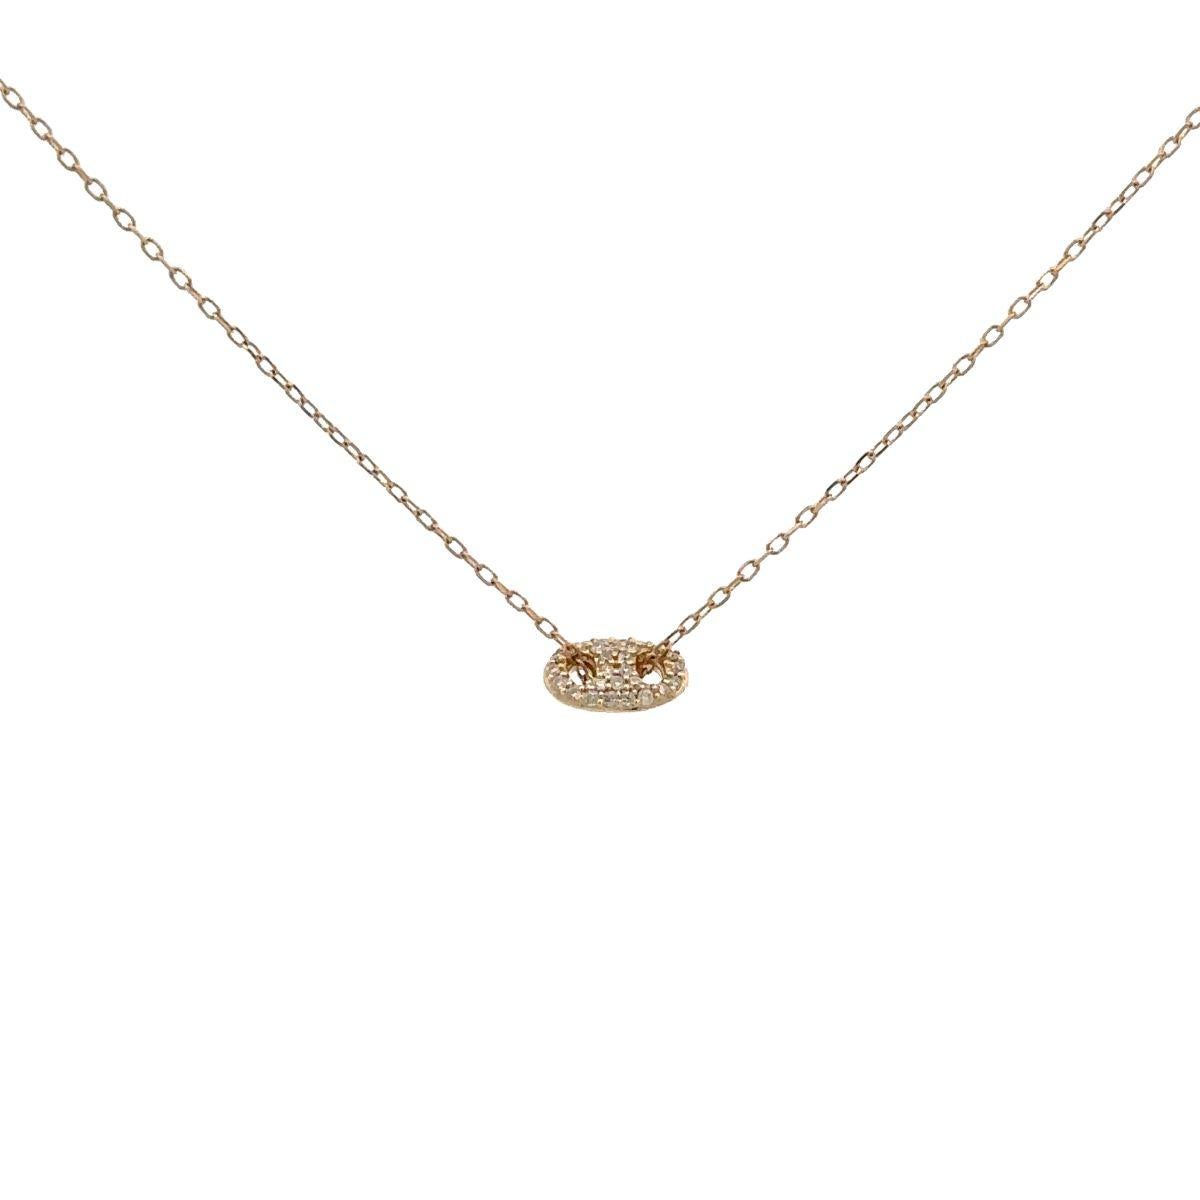 Adina Reyter One of a Kind Tiny Pavé Horizontal Mariner Link Necklace - Y14

14K yellow gold mariner link necklace with pave diamonds.

Measurements: 5 mm x 7 mm, adjustable 15-16